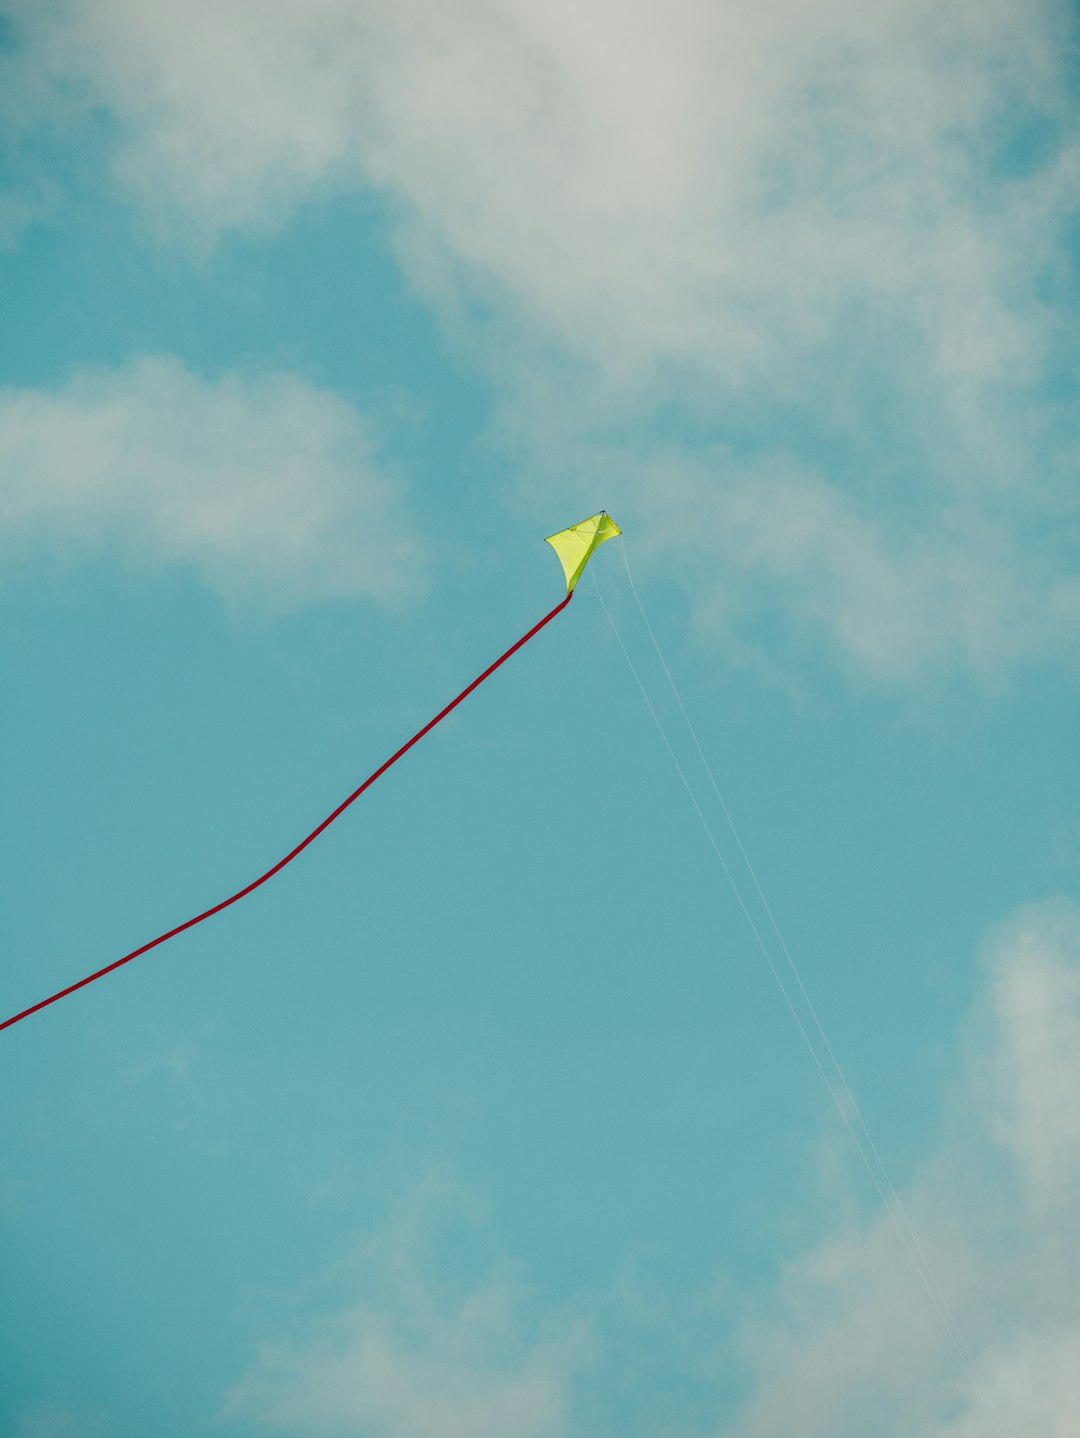 yellow paper kite flying on blue sky during daytime